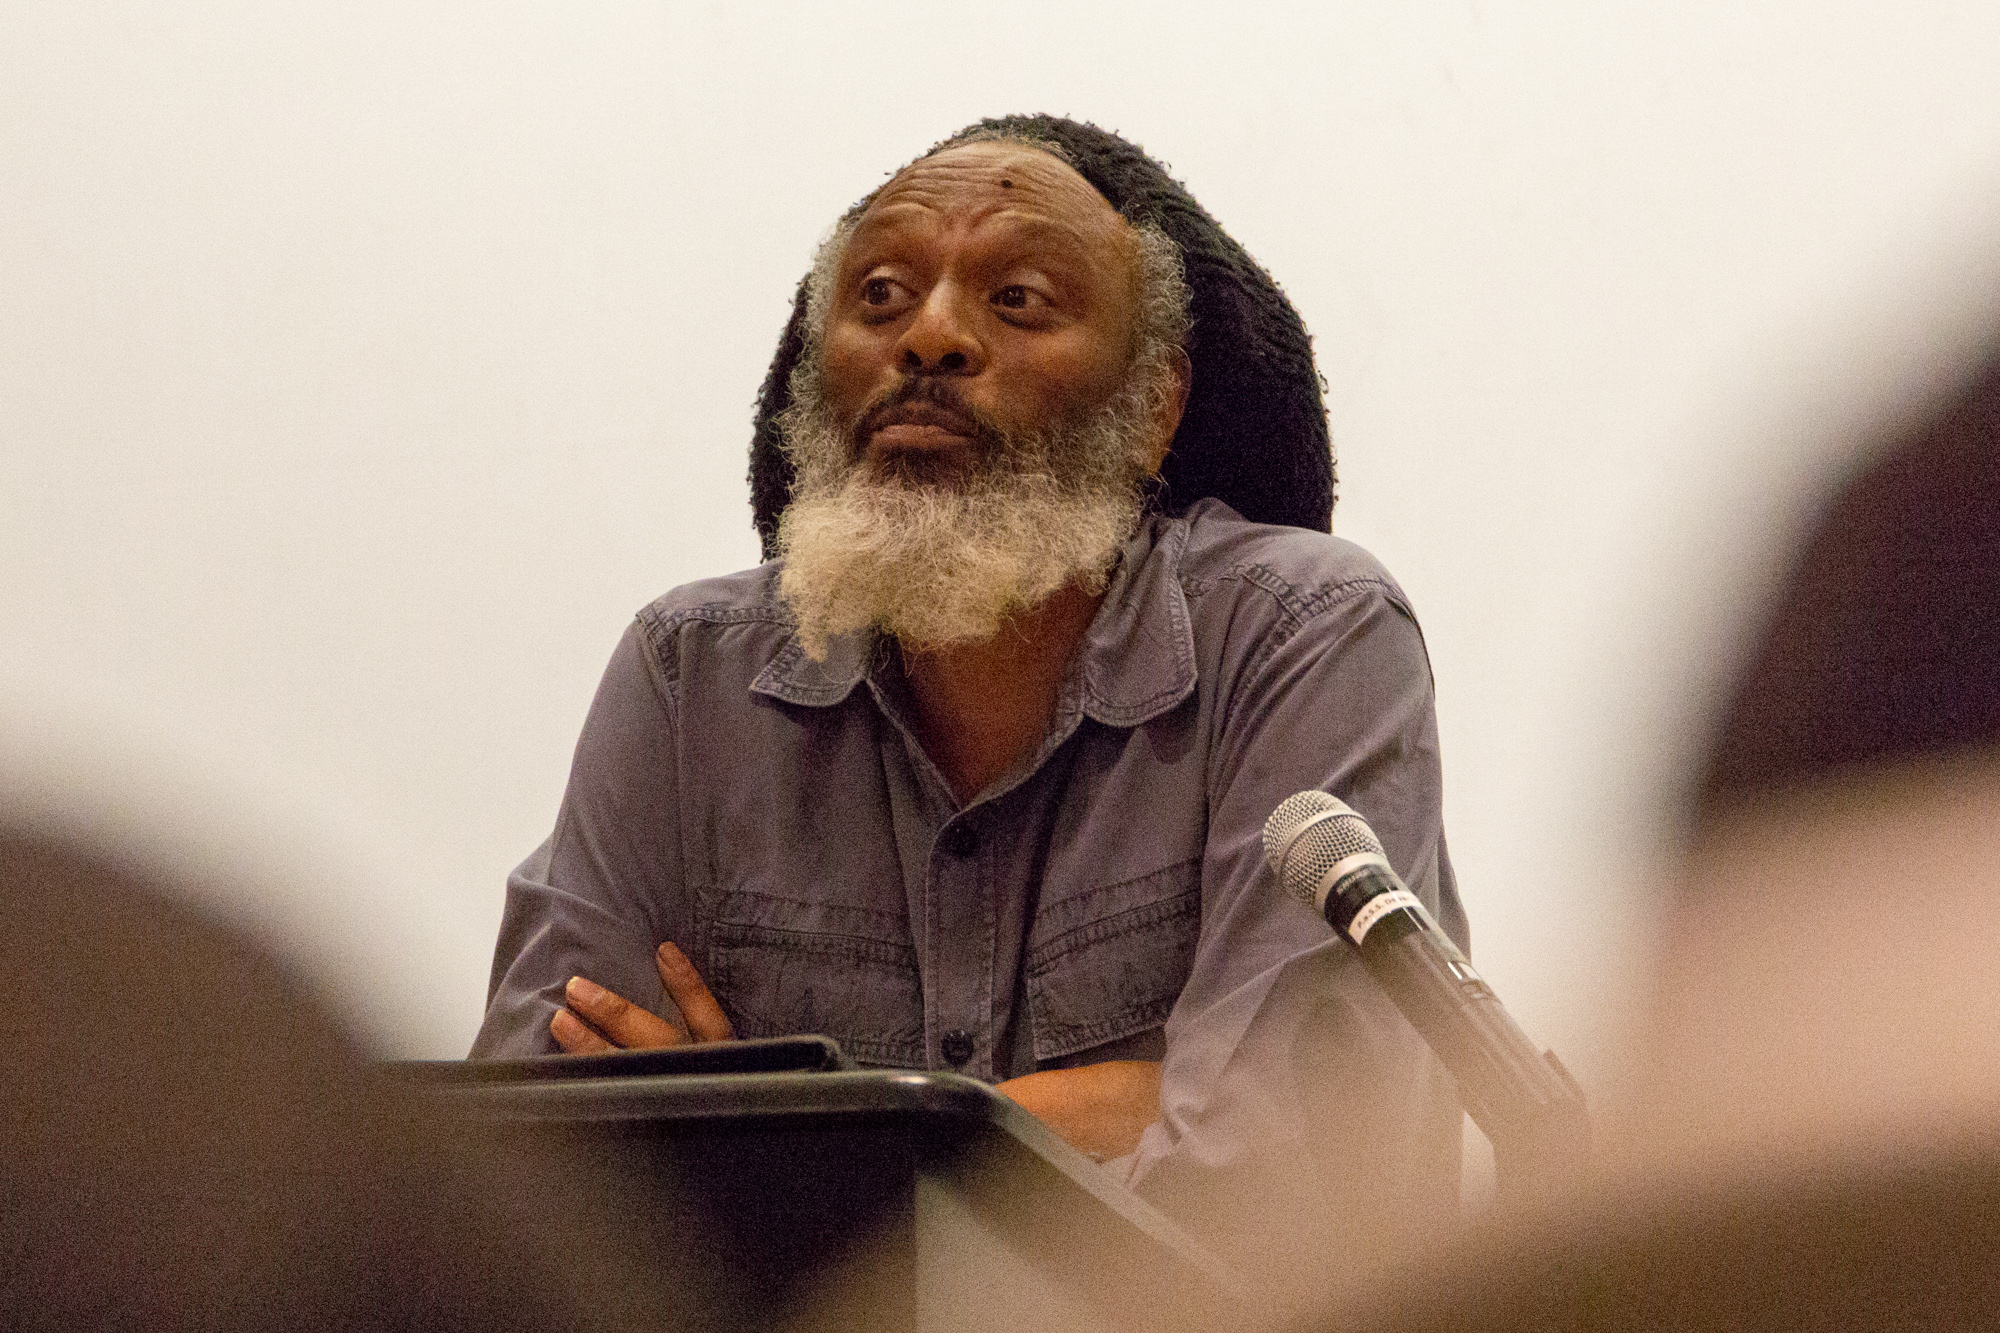  Poet and Professor of English Wilfred Doucet reads from his work at the "Modern Poetic Permutations" event held at Santa Monica College, Santa Monica, California on Thursday April 19 2018. on Thursday April 19 2018. (Ruth Iorio/ Corsair Photo) 